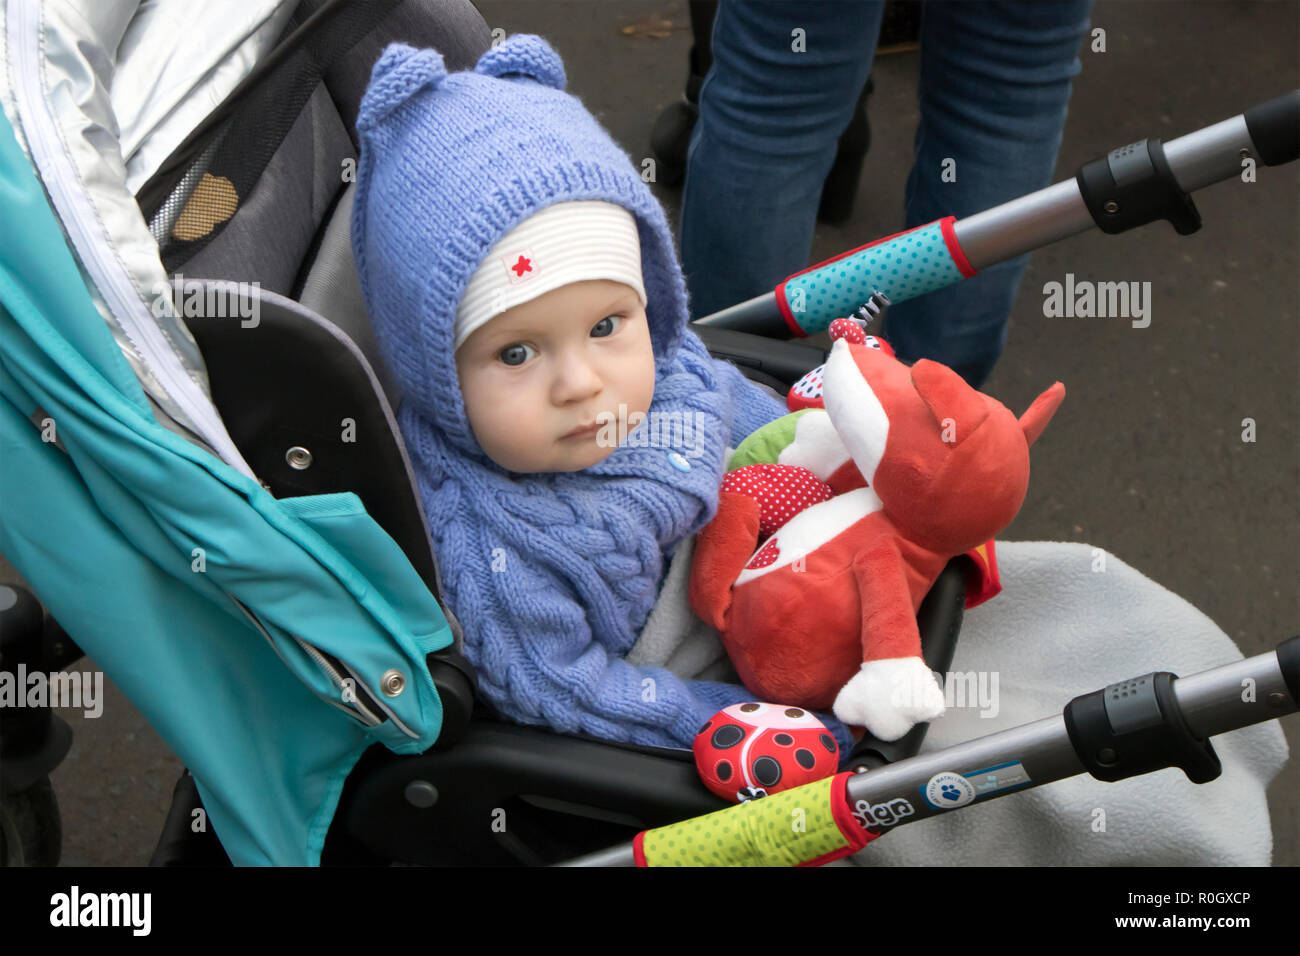 Cute serious baby sitting in stroller dressed in knitted azure costume with red toy in hands Stock Photo